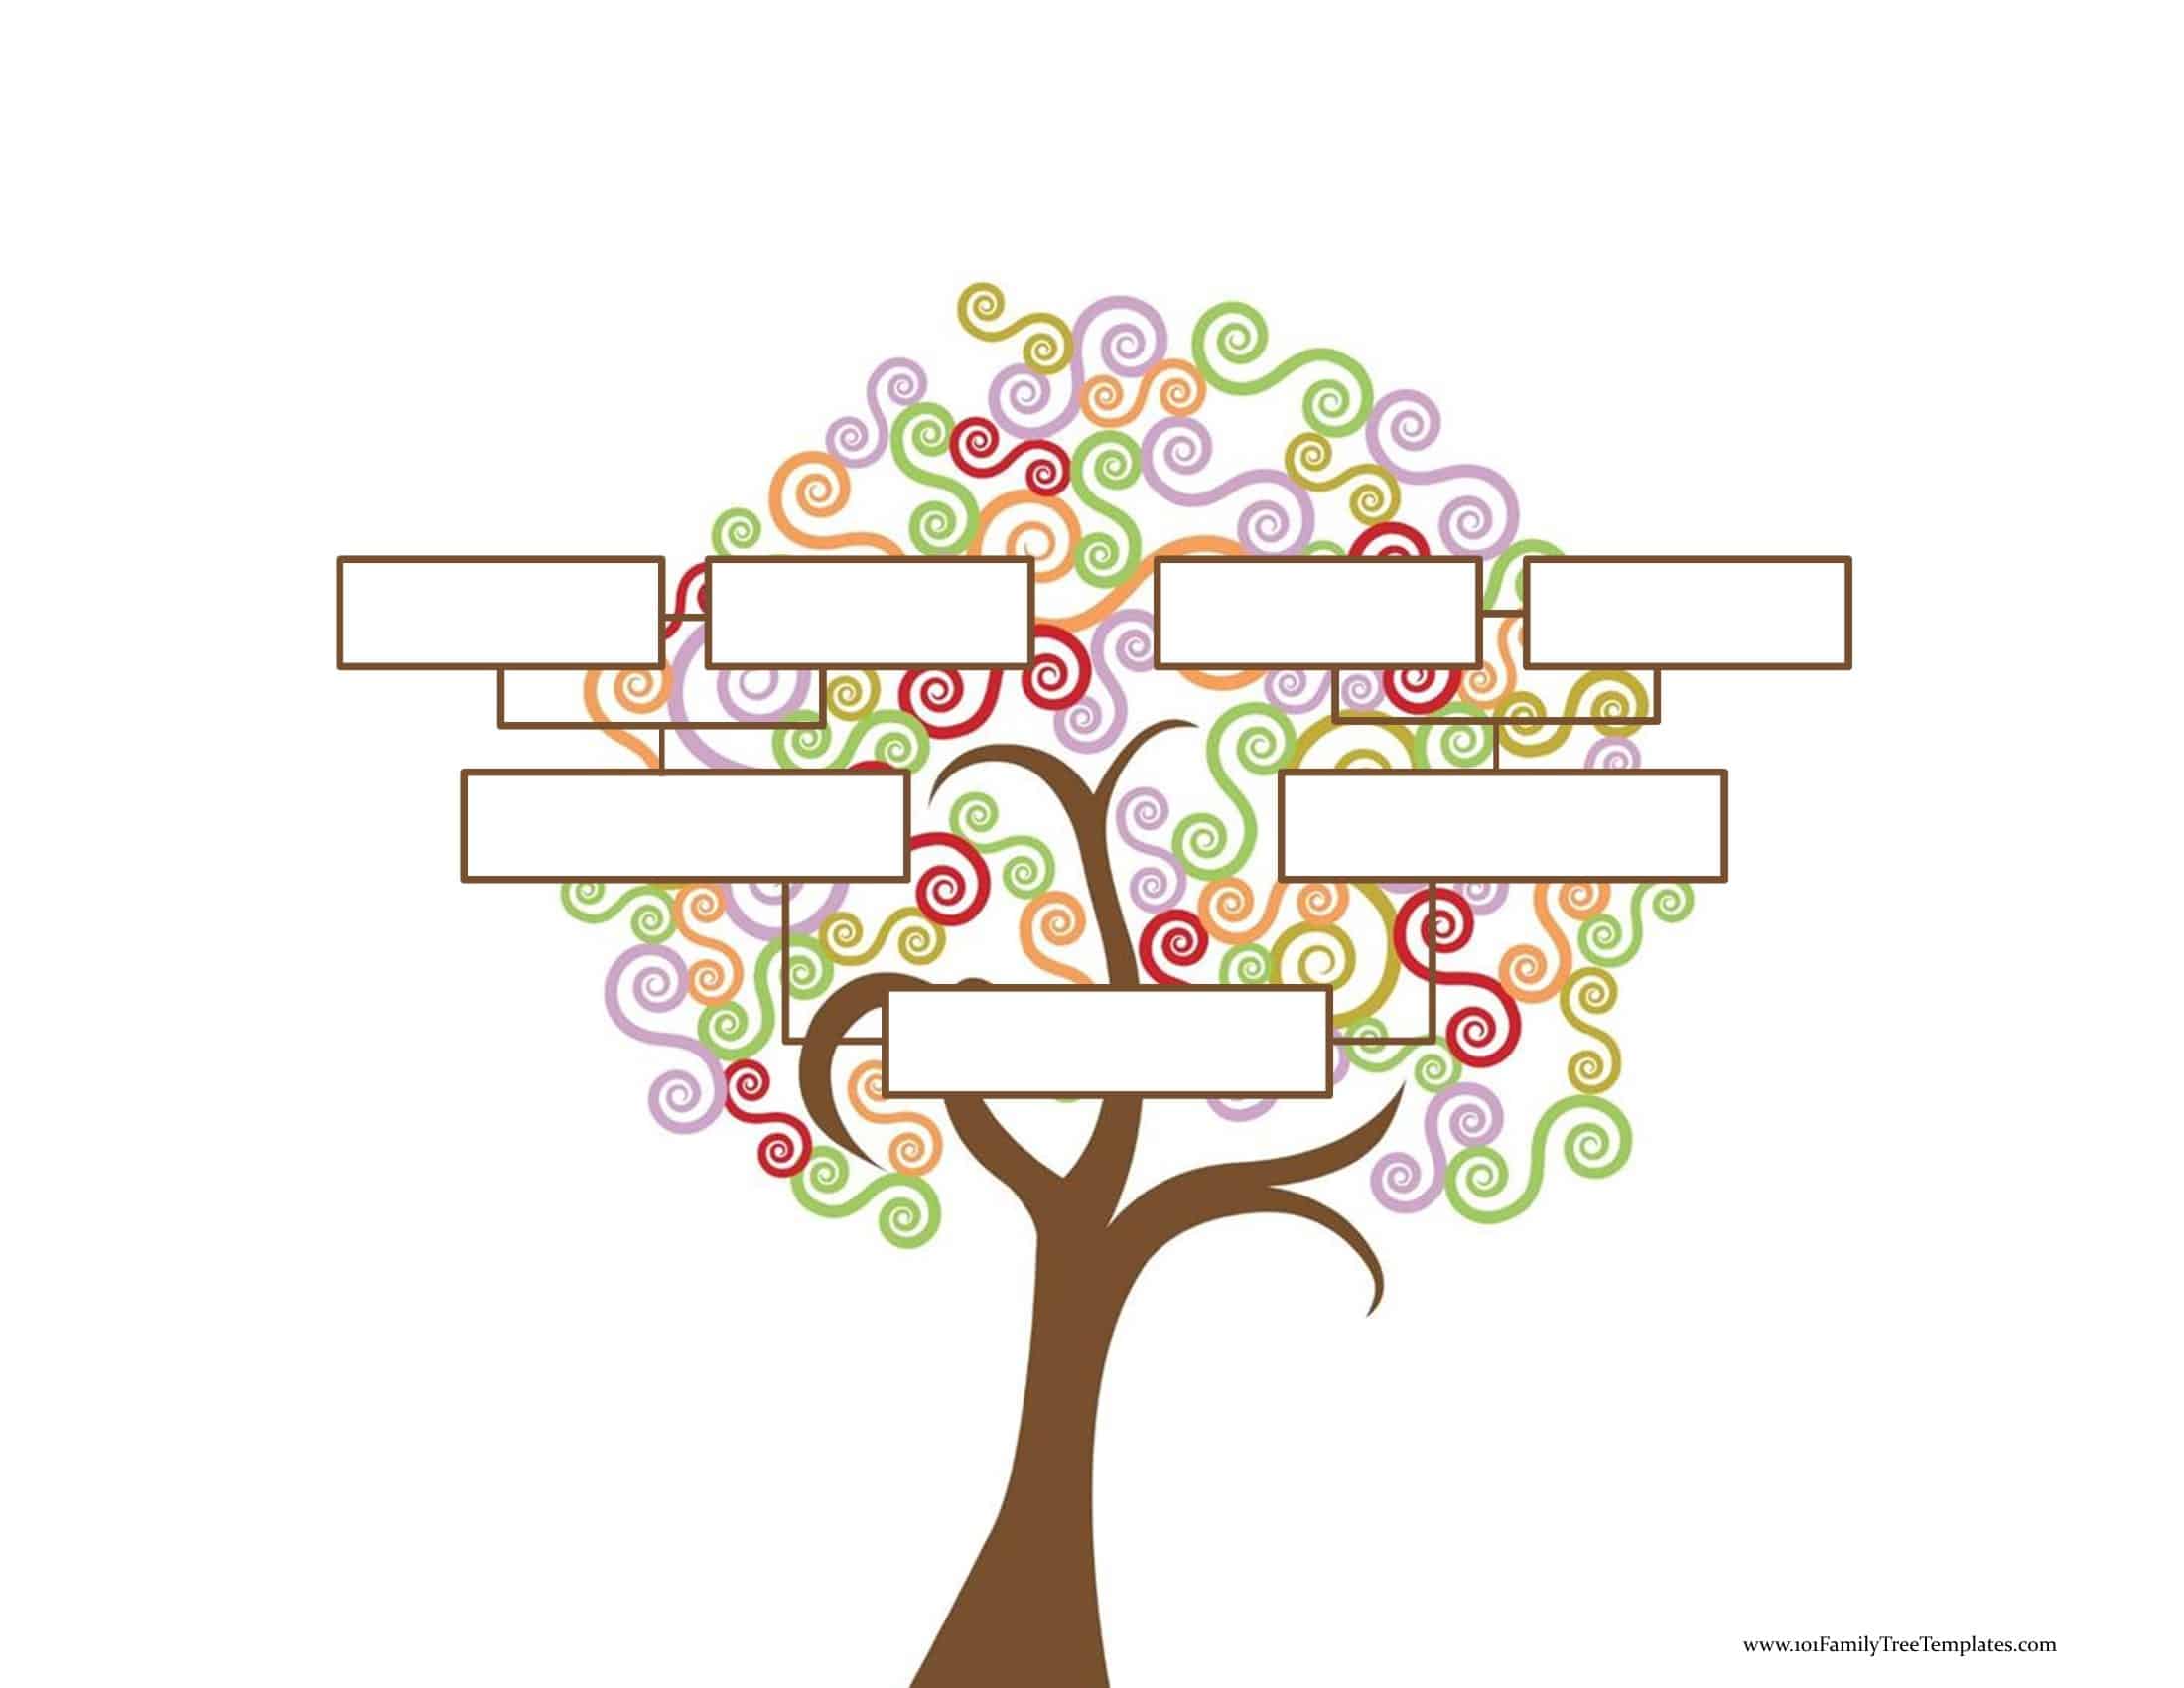 Template Family Tree from www.101familytrees.com